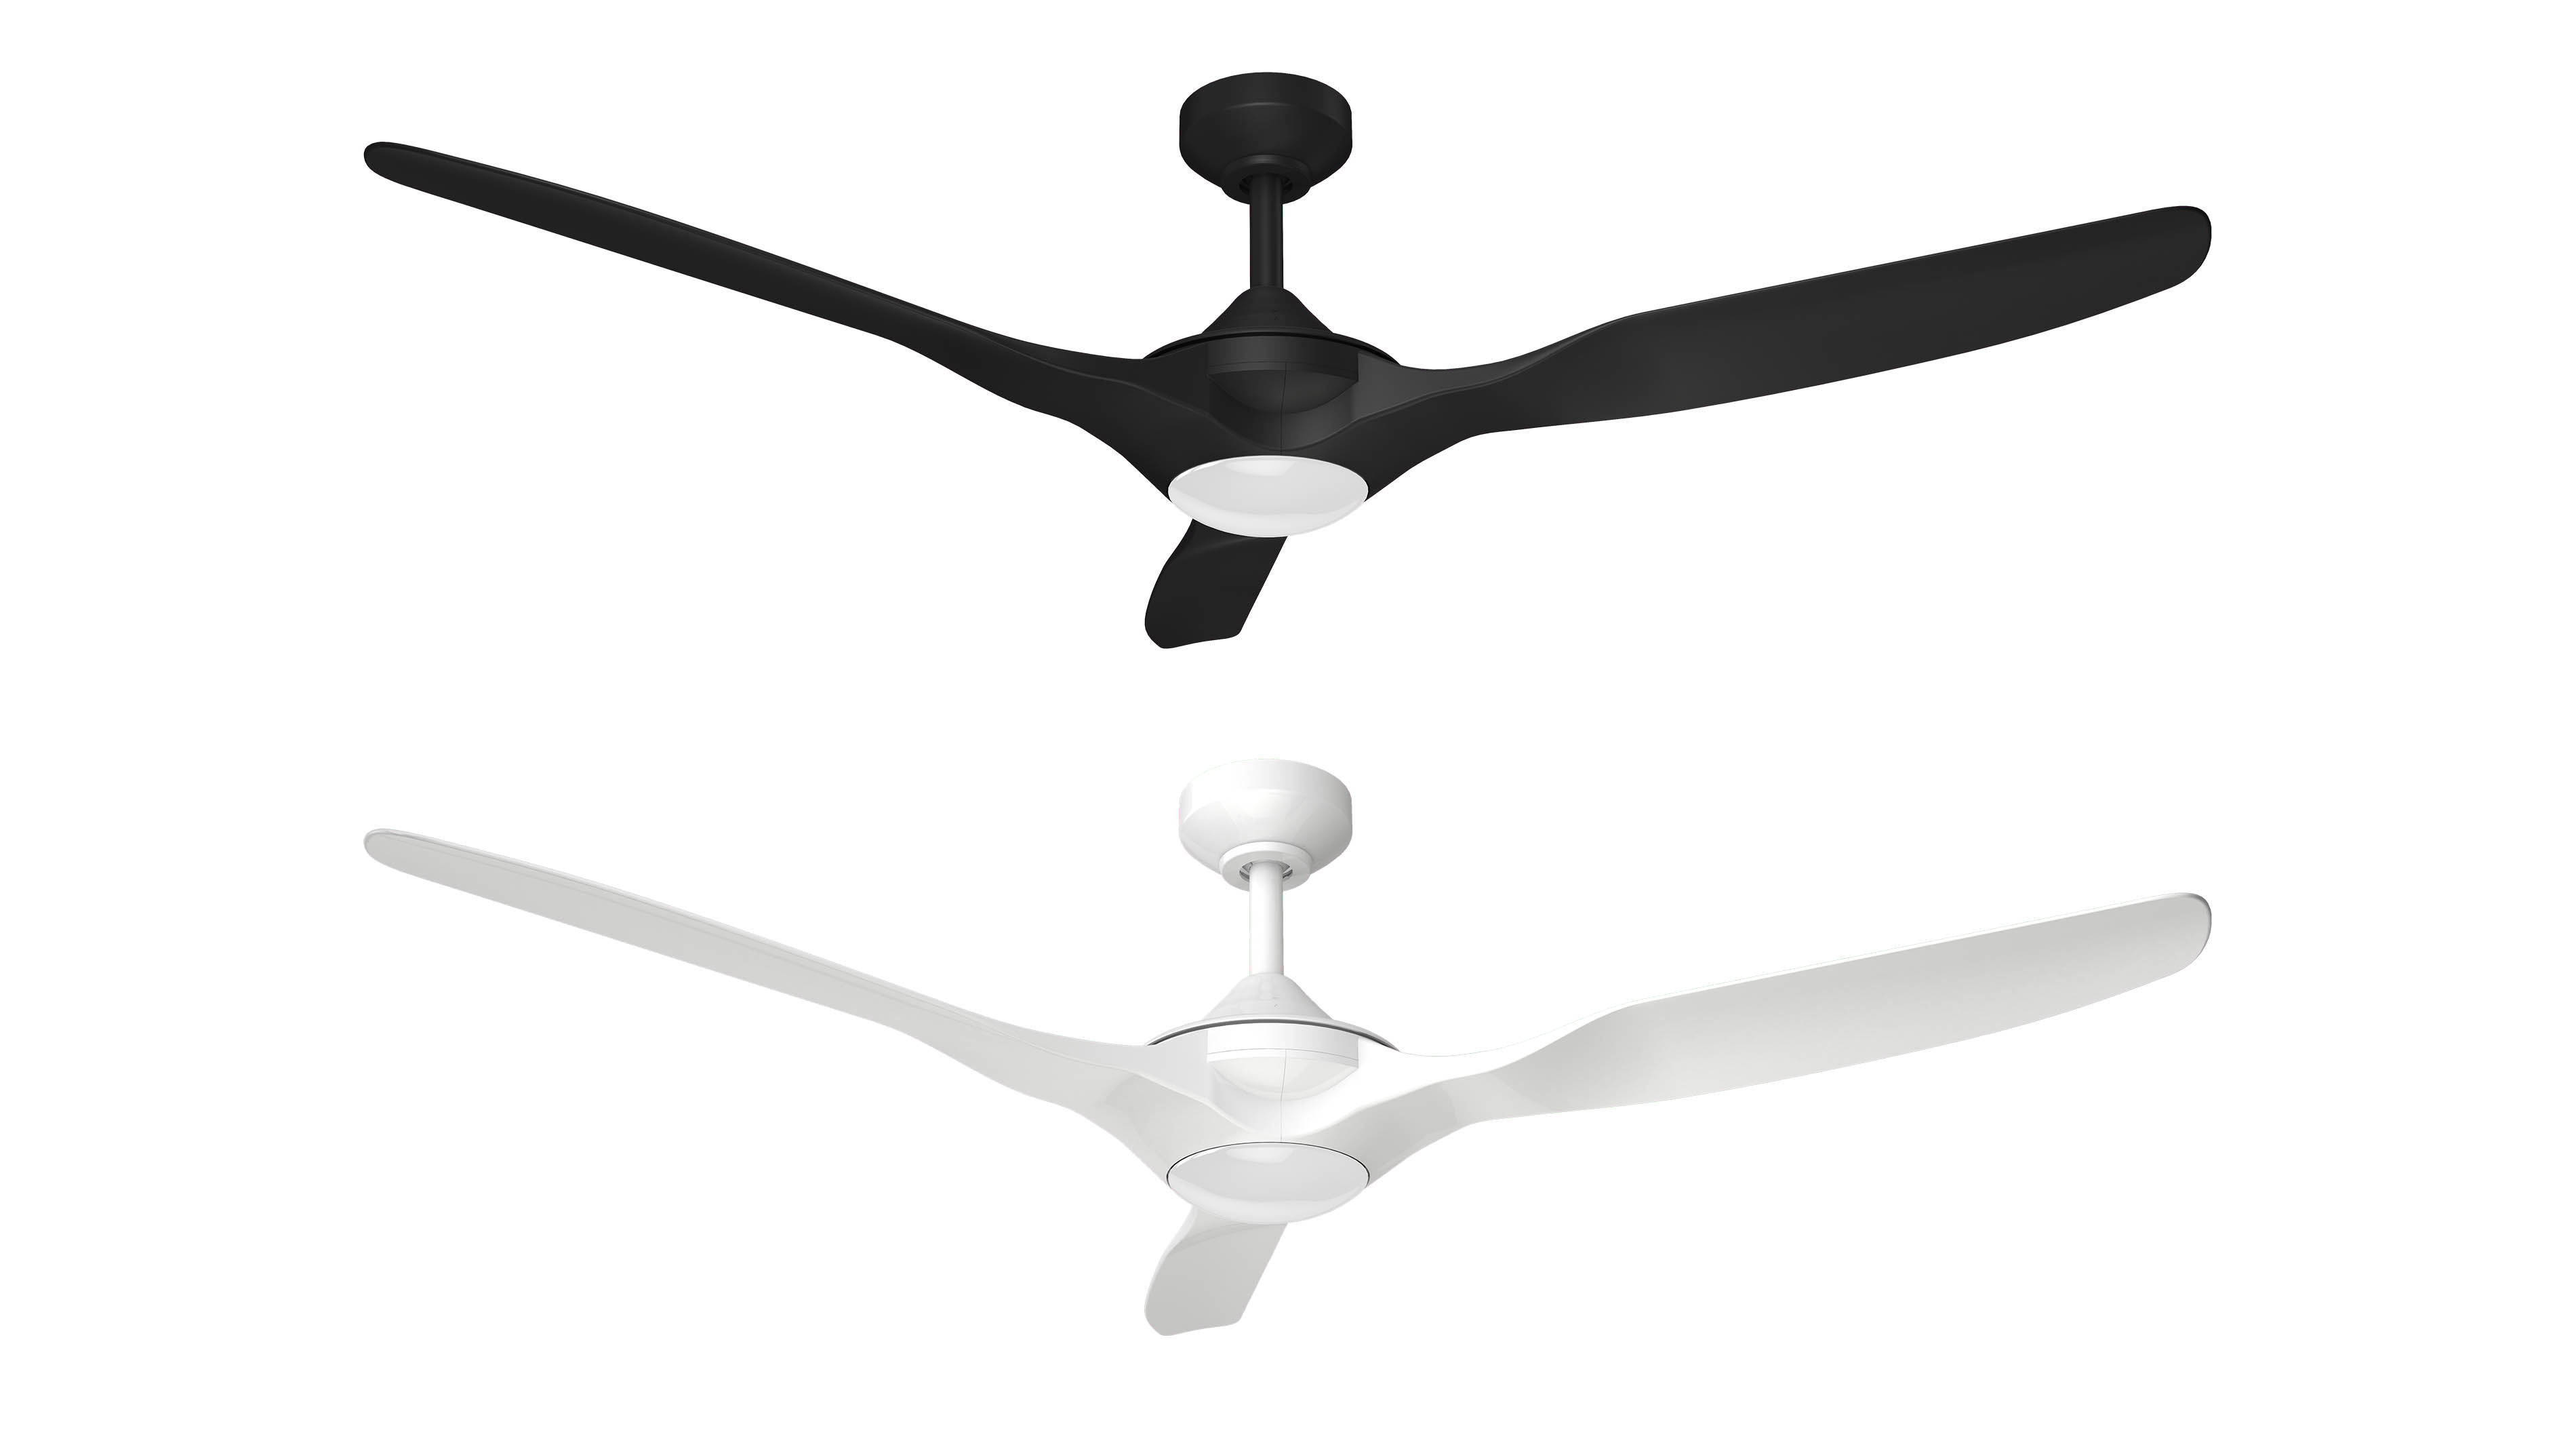 DC Energy-saving Ceiling Fan With Light - VCA G2 Series / DELTA ELECTRONICS, INC.